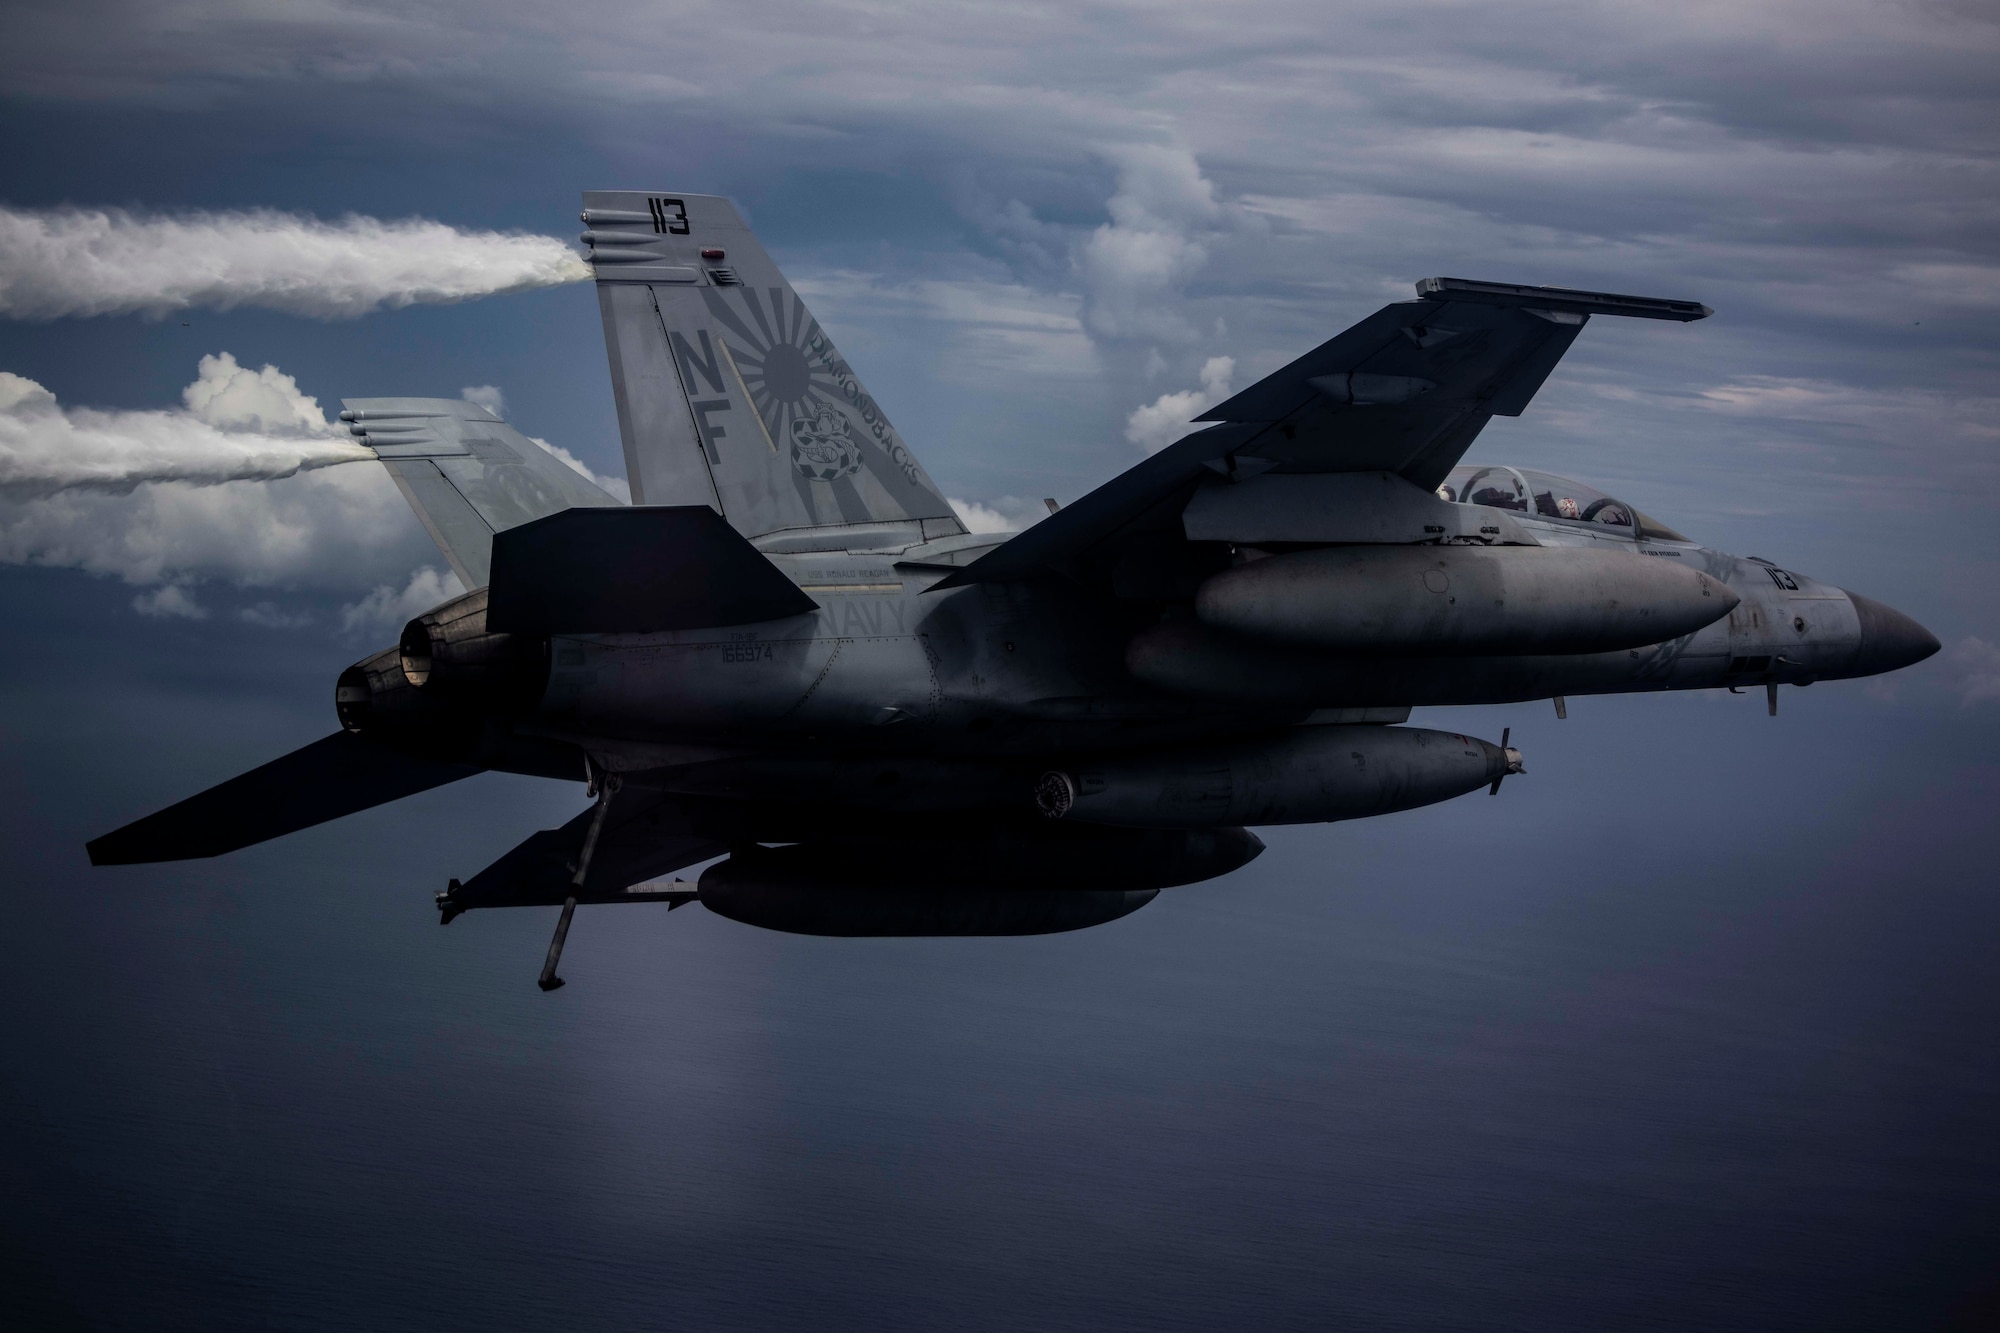 An F/A-18 Super Hornet attached to the “Diamondbacks” of Strike Fighter Squadron (VFA) 102 conducts air operations while flying with aircraft from the Nimitz Carrier Strike Force. The USS Nimitz (CVN 68) and USS Ronald Reagan (CVN 76) Carrier Strike Groups are conducting dual-carrier operations in the South China Sea as the Nimitz Carrier Strike Force. (U.S. Navy photo by Lt. Cmdr. Joseph Stephens)